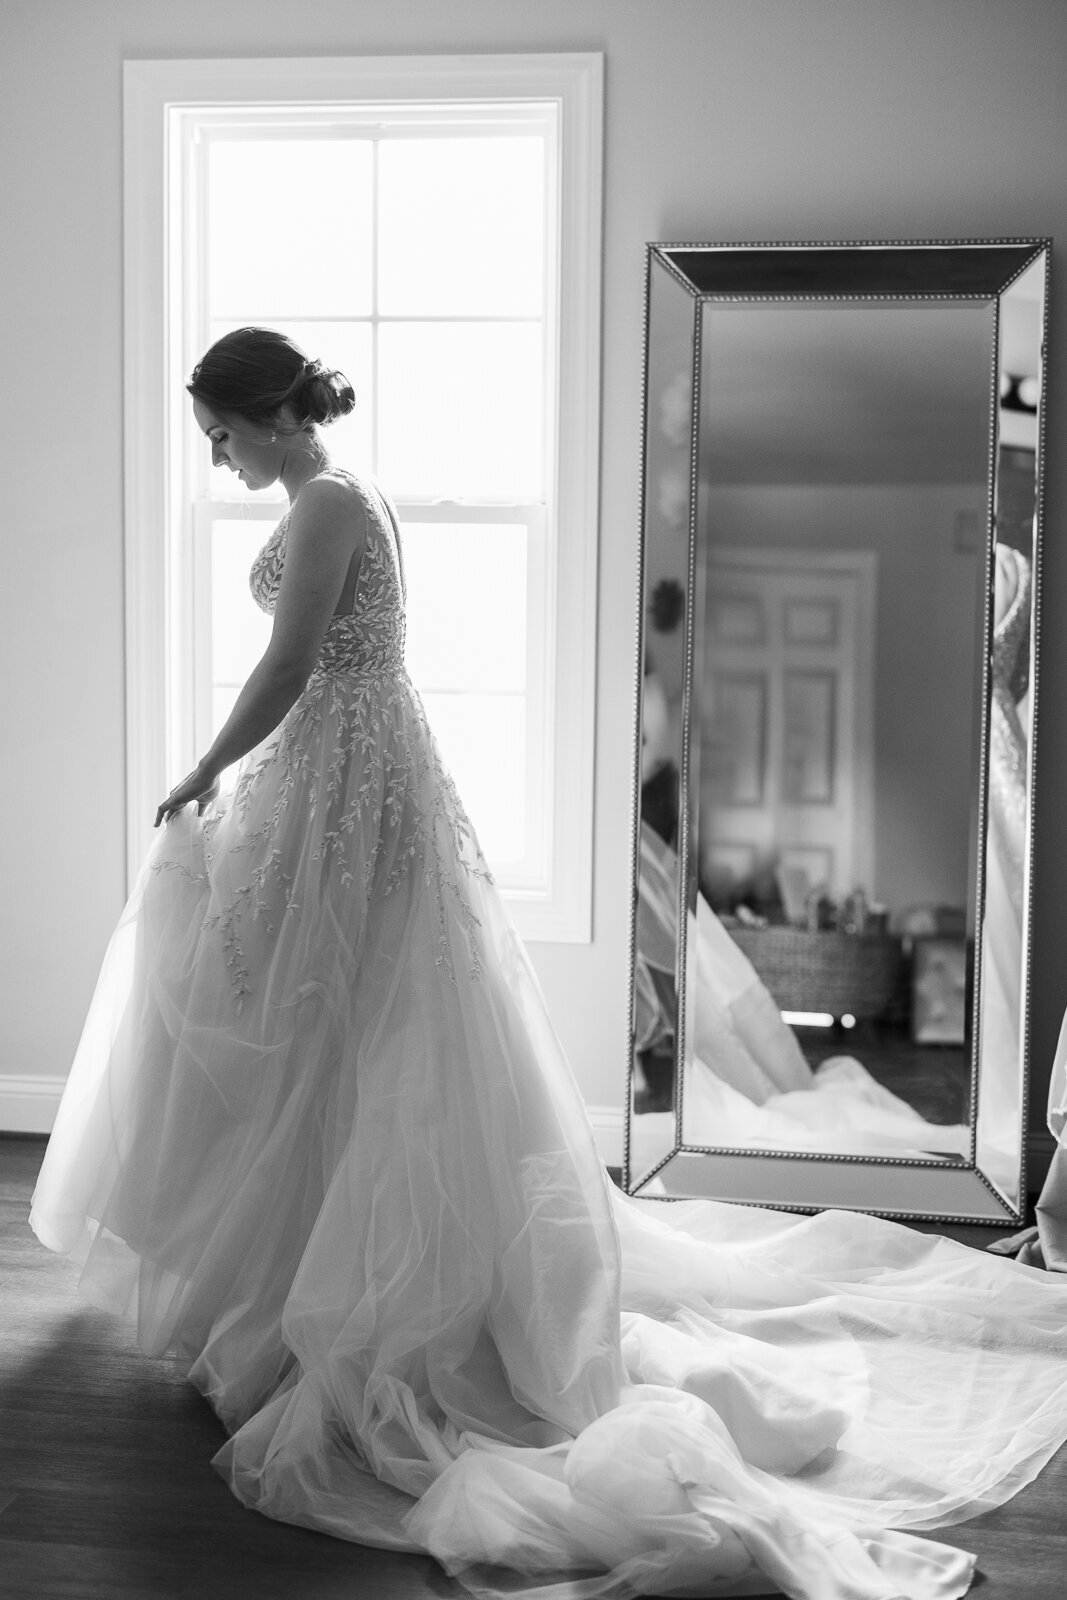 Wedding Photographer, a bride is all dressed up standing and waiting in a n empty bedroom